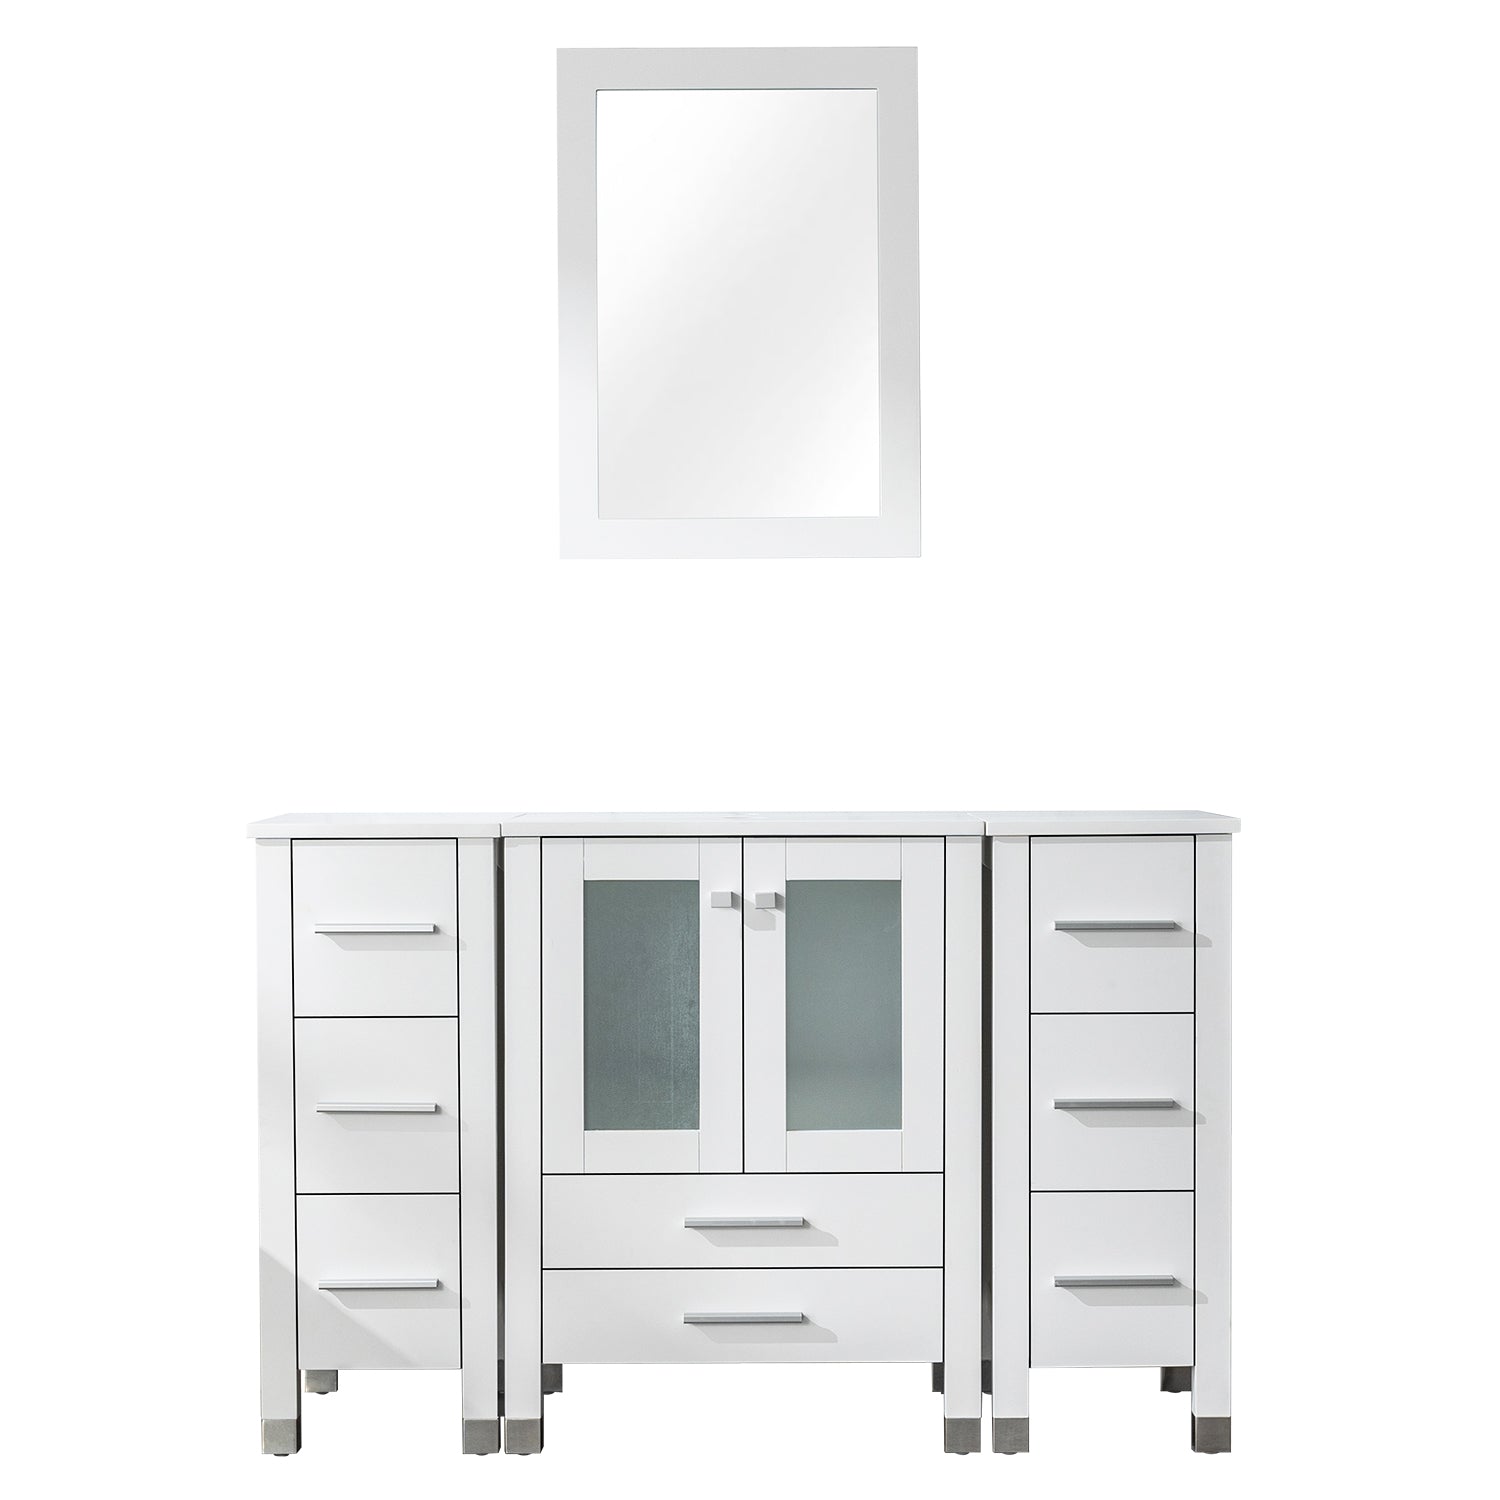 Eclife 48" Bathroom Vanity Sink Combo, Solid Wood Construction and Painted Frame - White